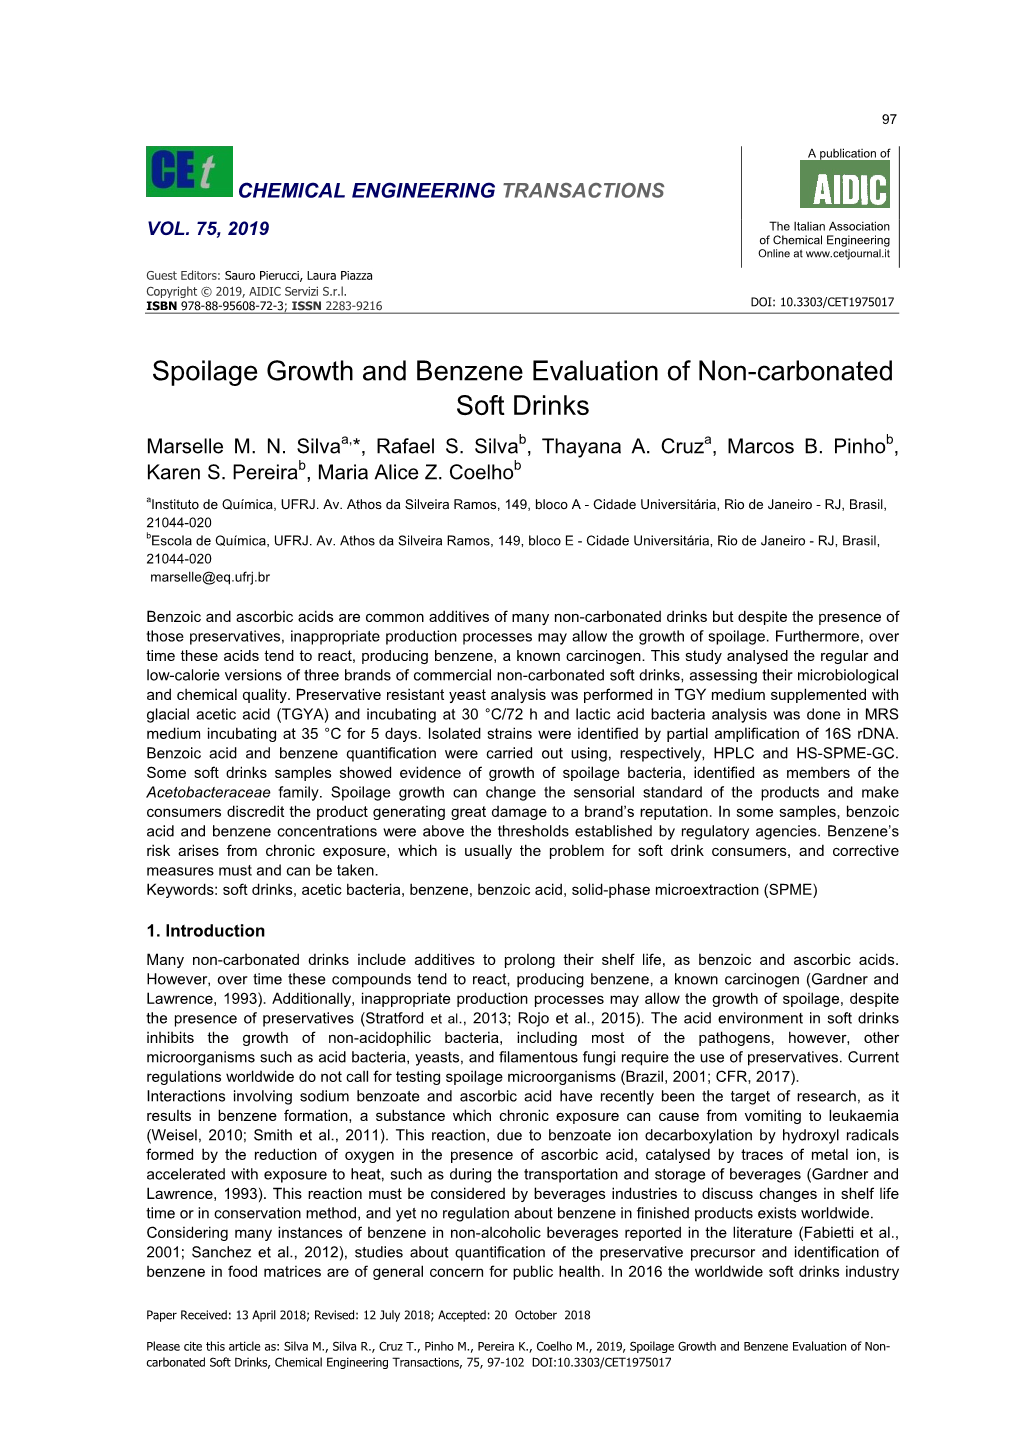 Spoilage Growth and Benzene Evaluation of Non-Carbonated Soft